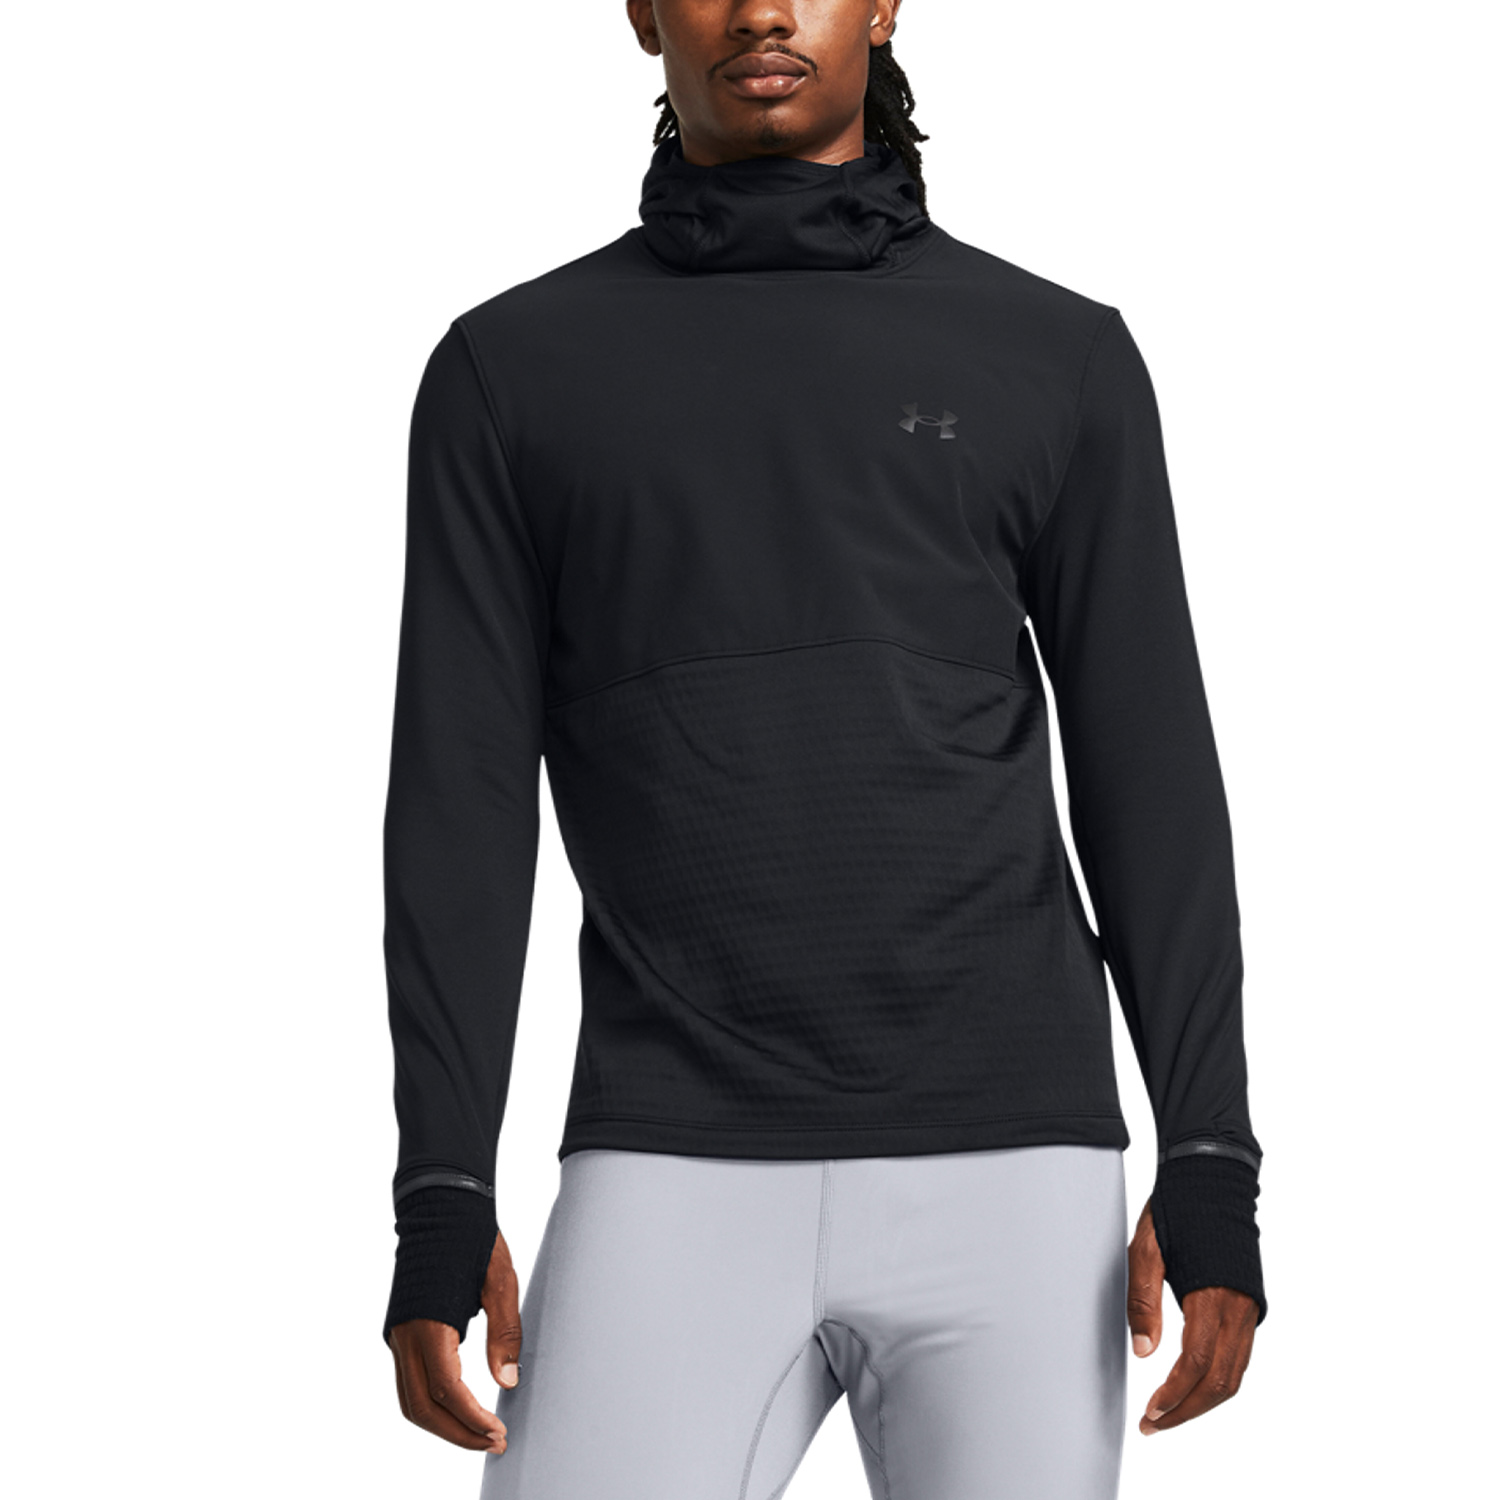 Under Armour Qualifier Cold Hoodie - Black/Reflective